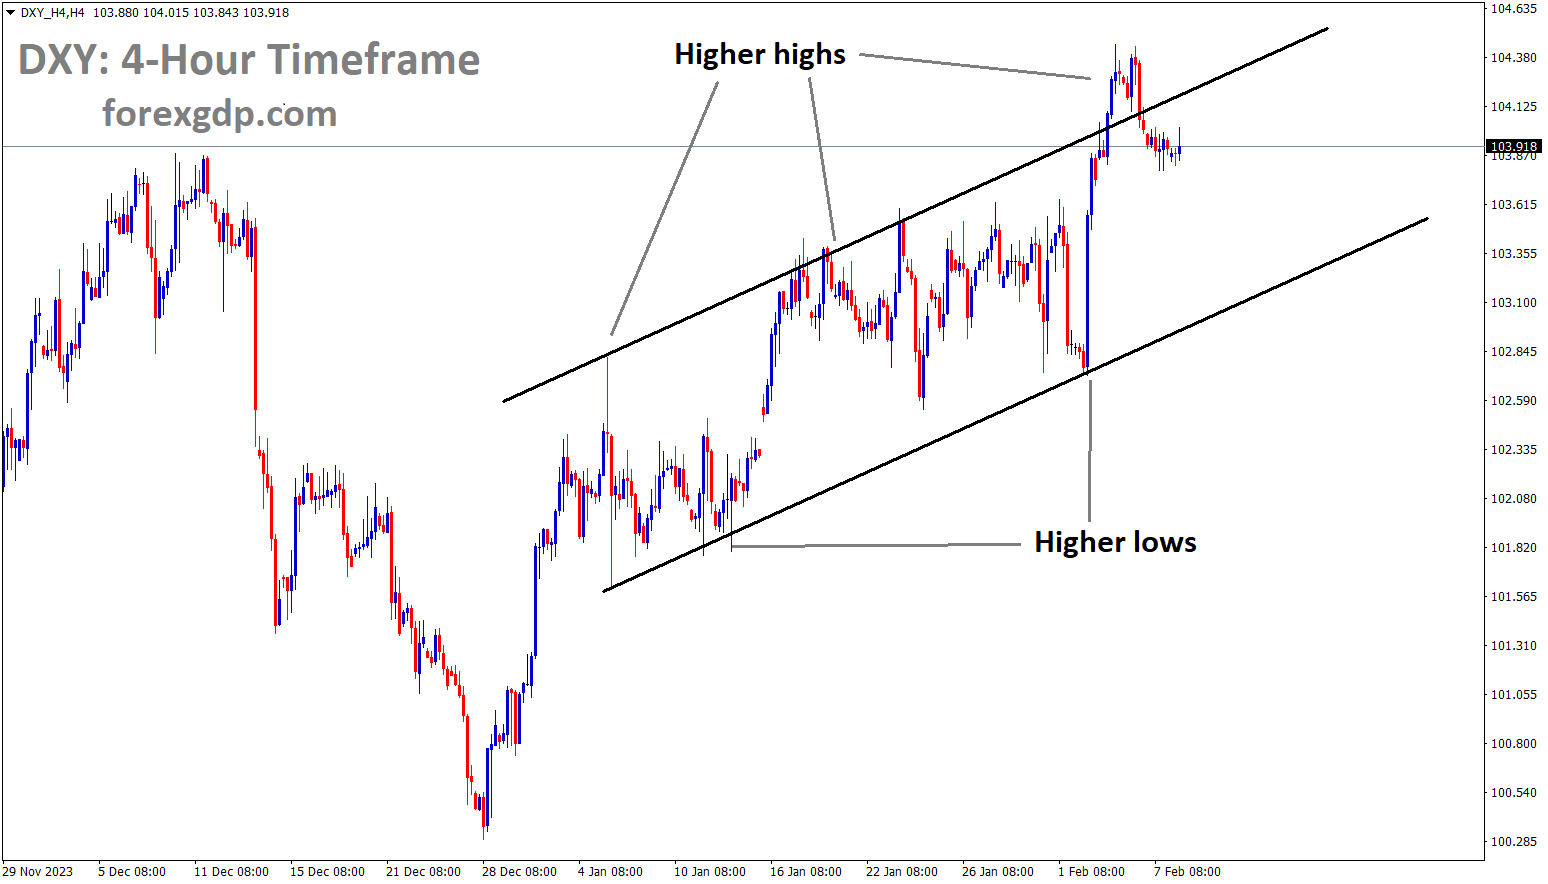 USD index is moving in an Ascending channel and the market has fallen from the higher high area of the channel